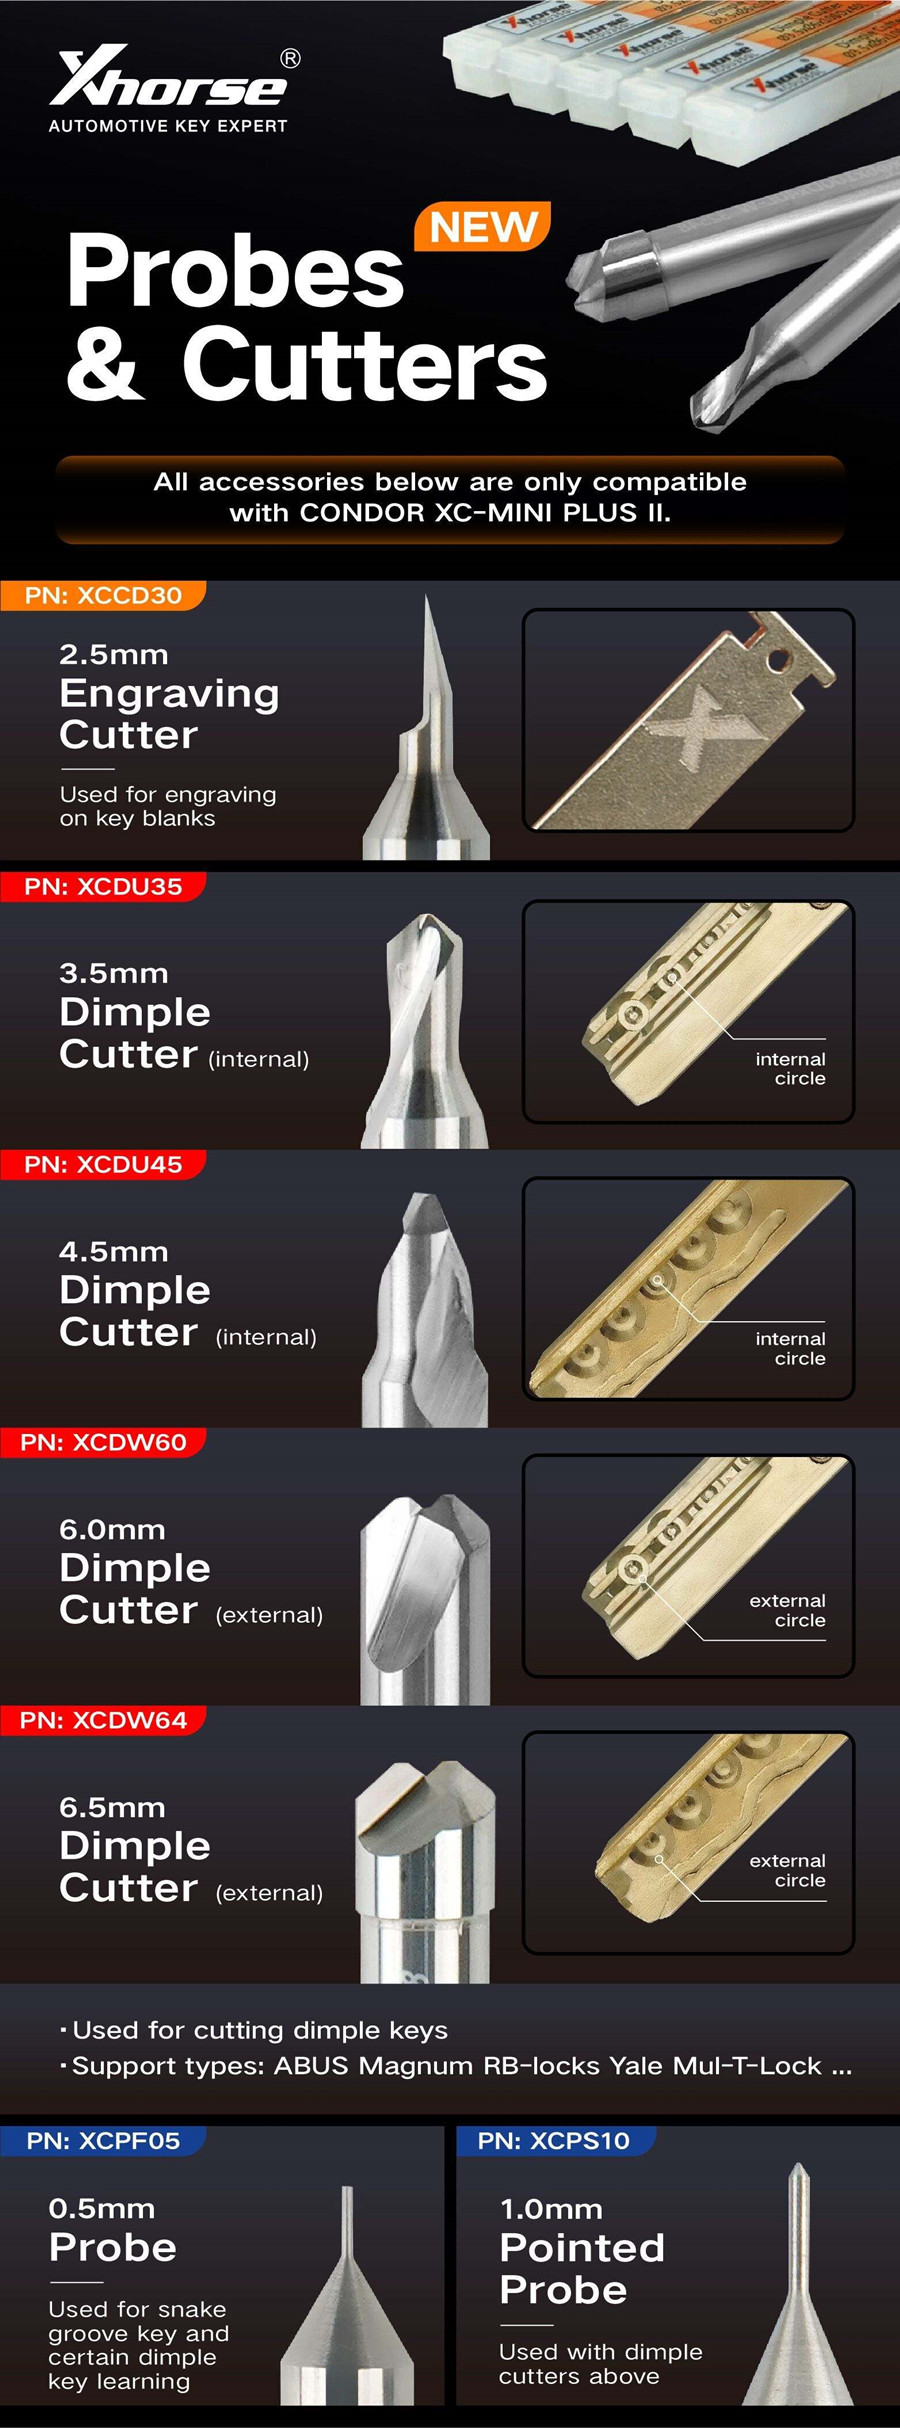 Xhorse Probles & Cutters